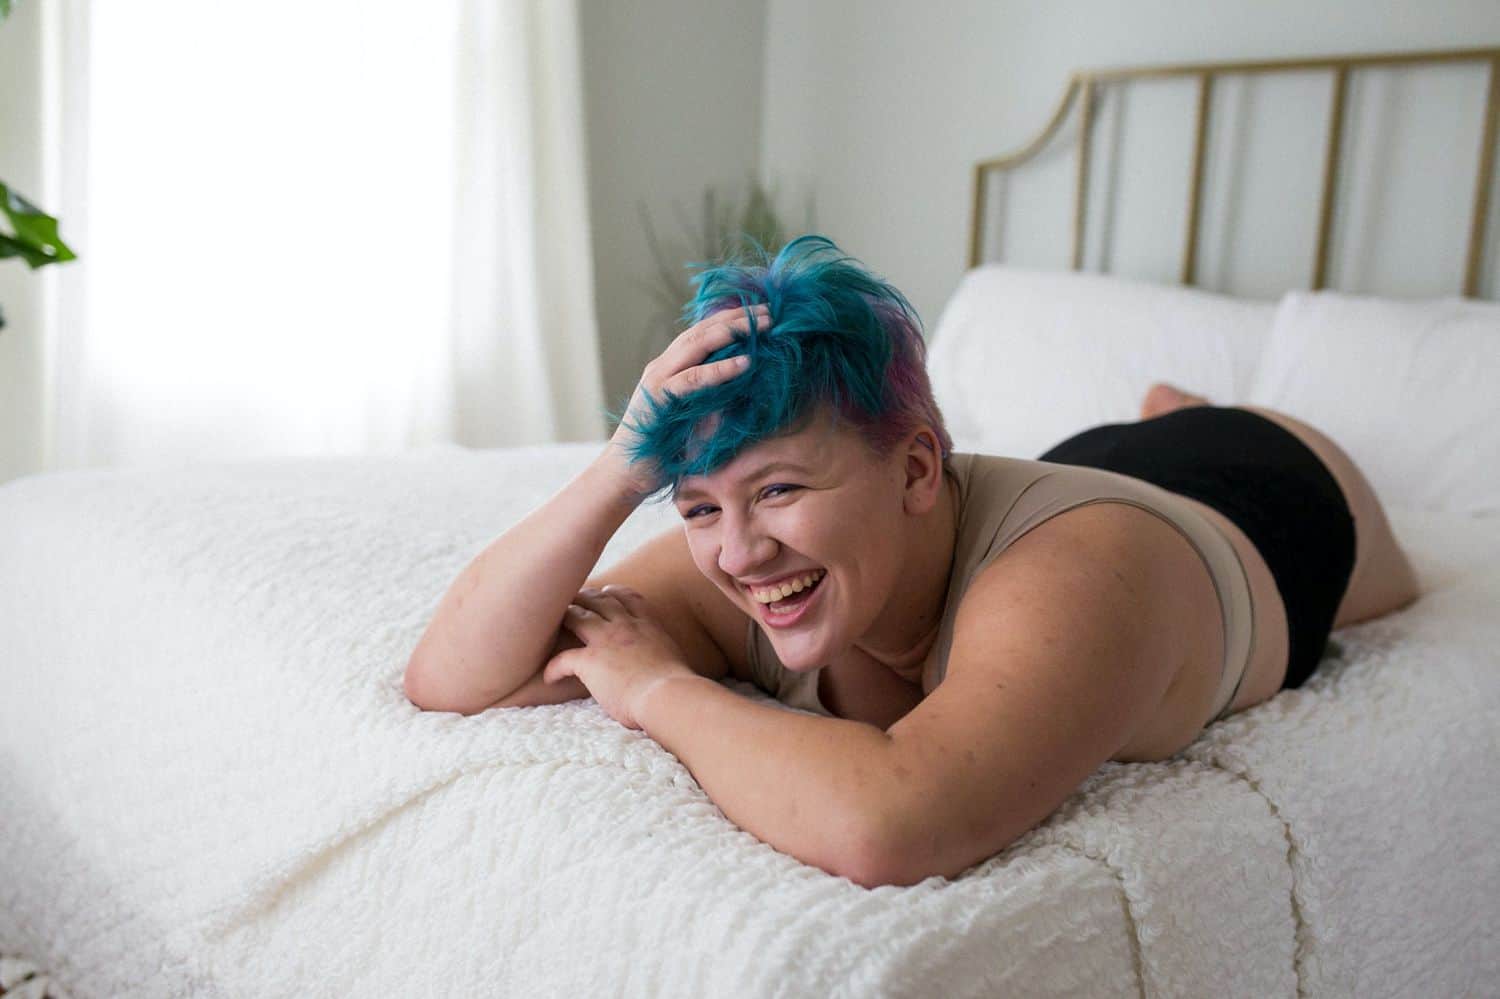 A person with fair skin and short blue hair lies on their tummy on a white bed with their head in their hand. The model is laughing as they are photographed by boudoir photographer Kinzie Ferguson, the Empowerment Photographer